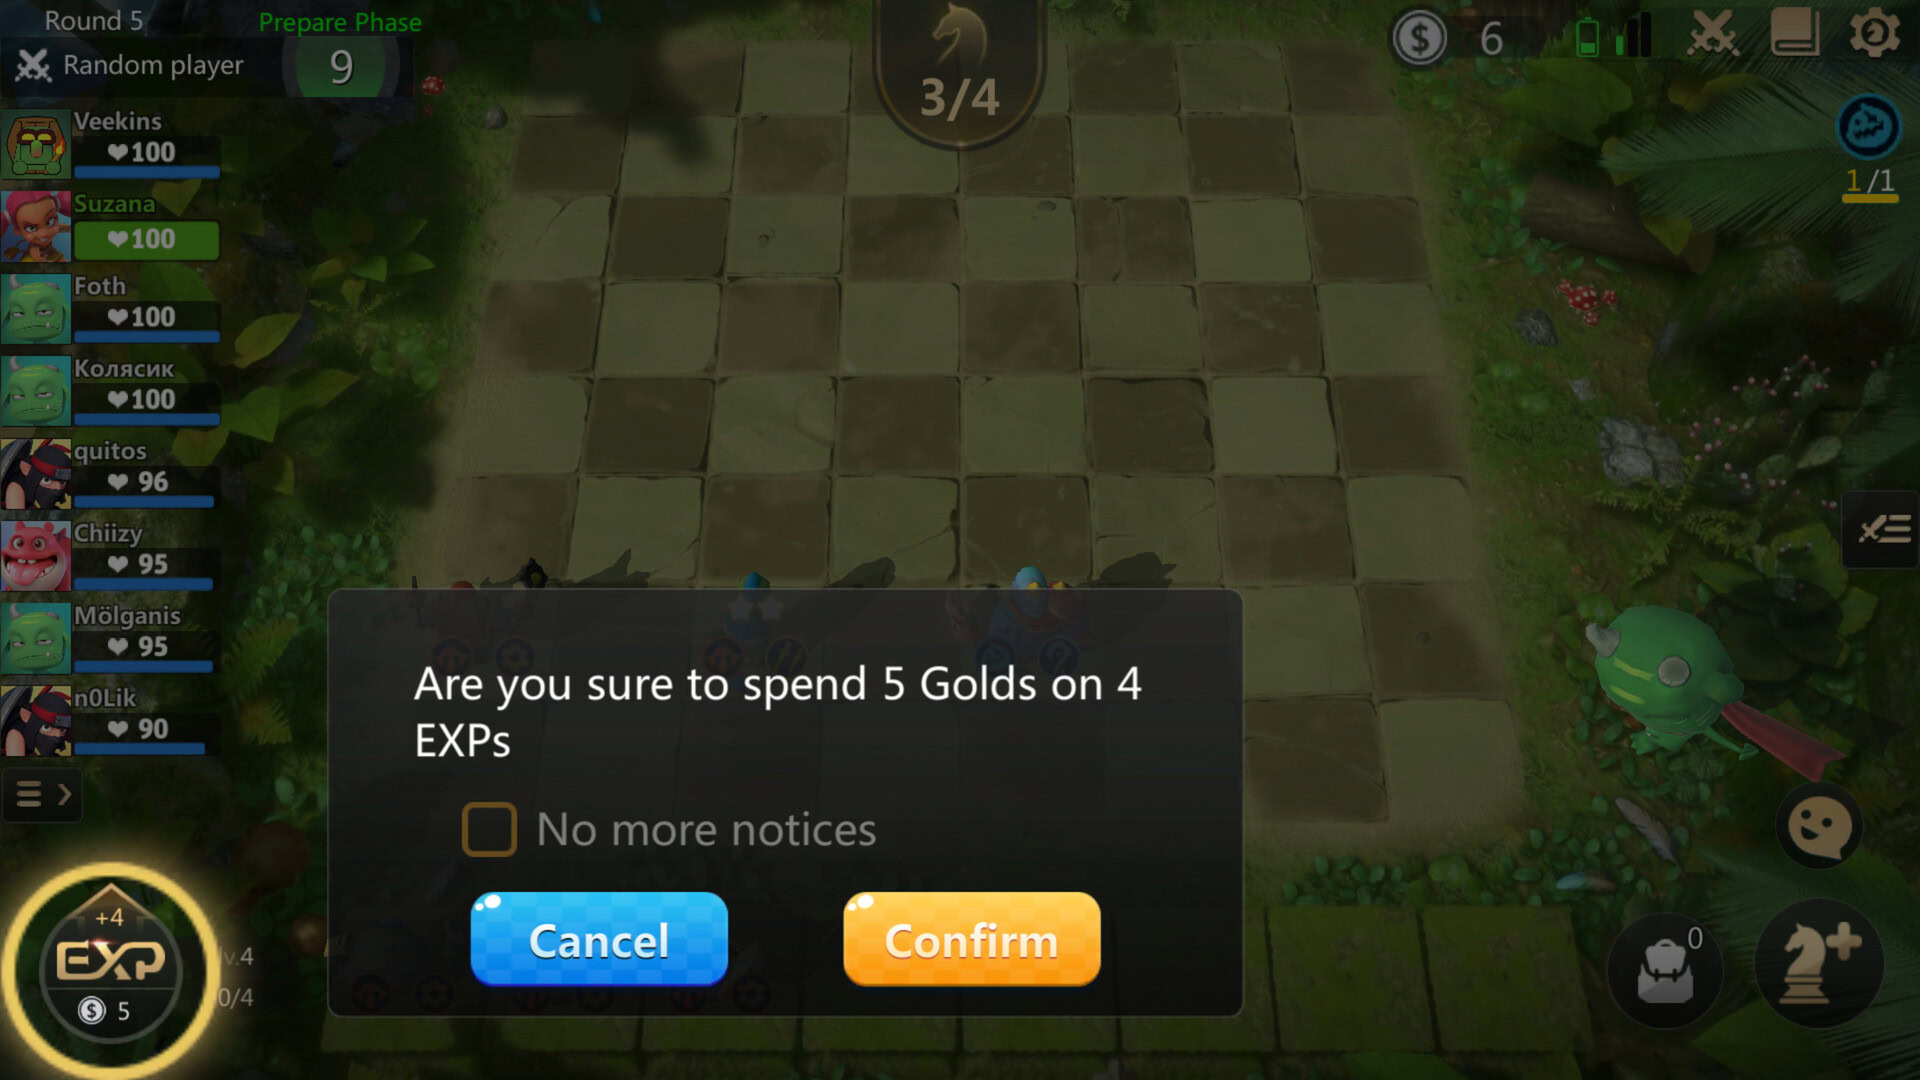 TB 3 on Auto Chess Mobile Playstore Version : r/AutoChess